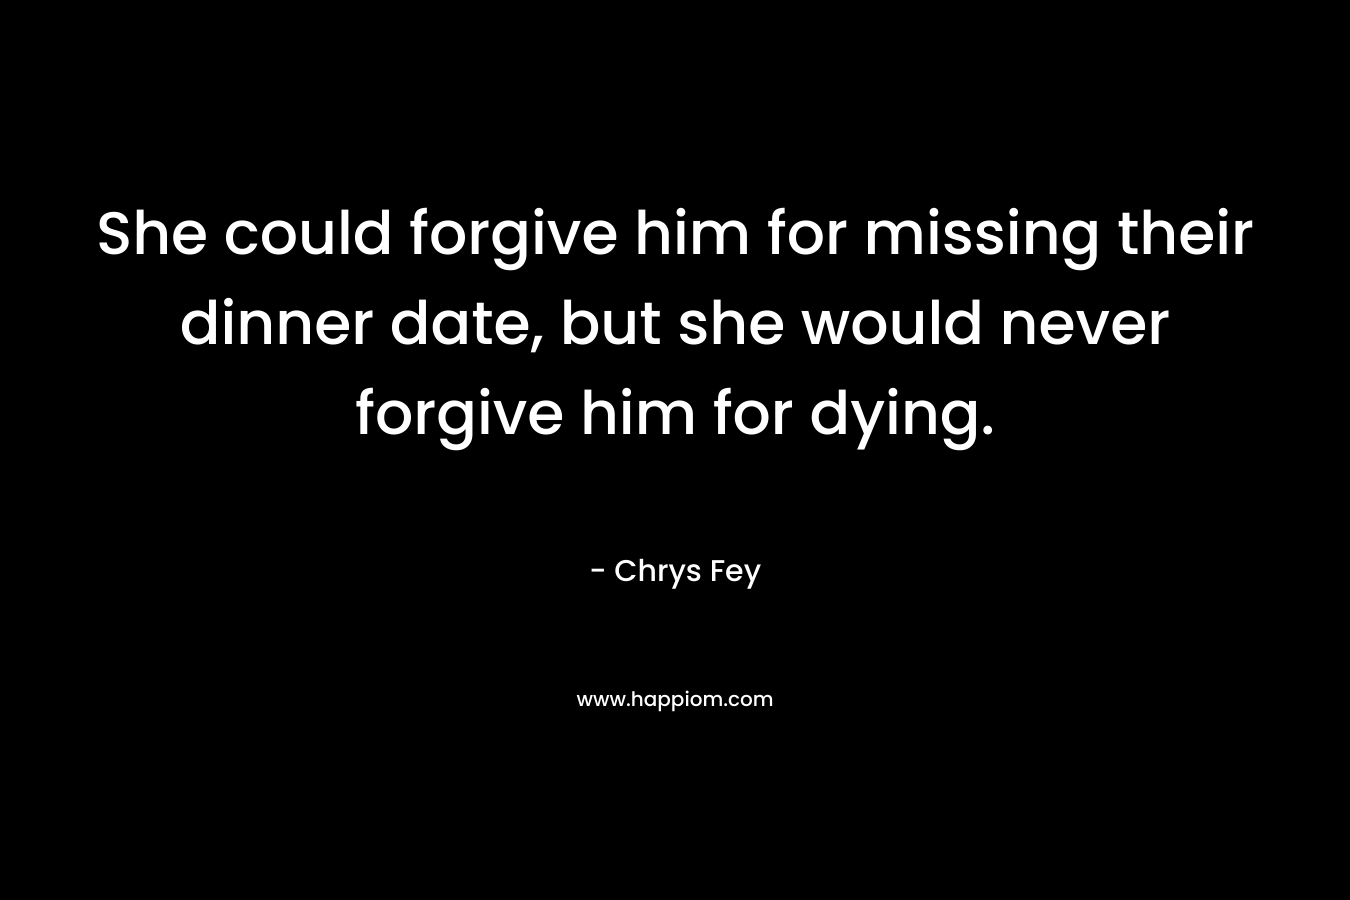 She could forgive him for missing their dinner date, but she would never forgive him for dying. – Chrys Fey